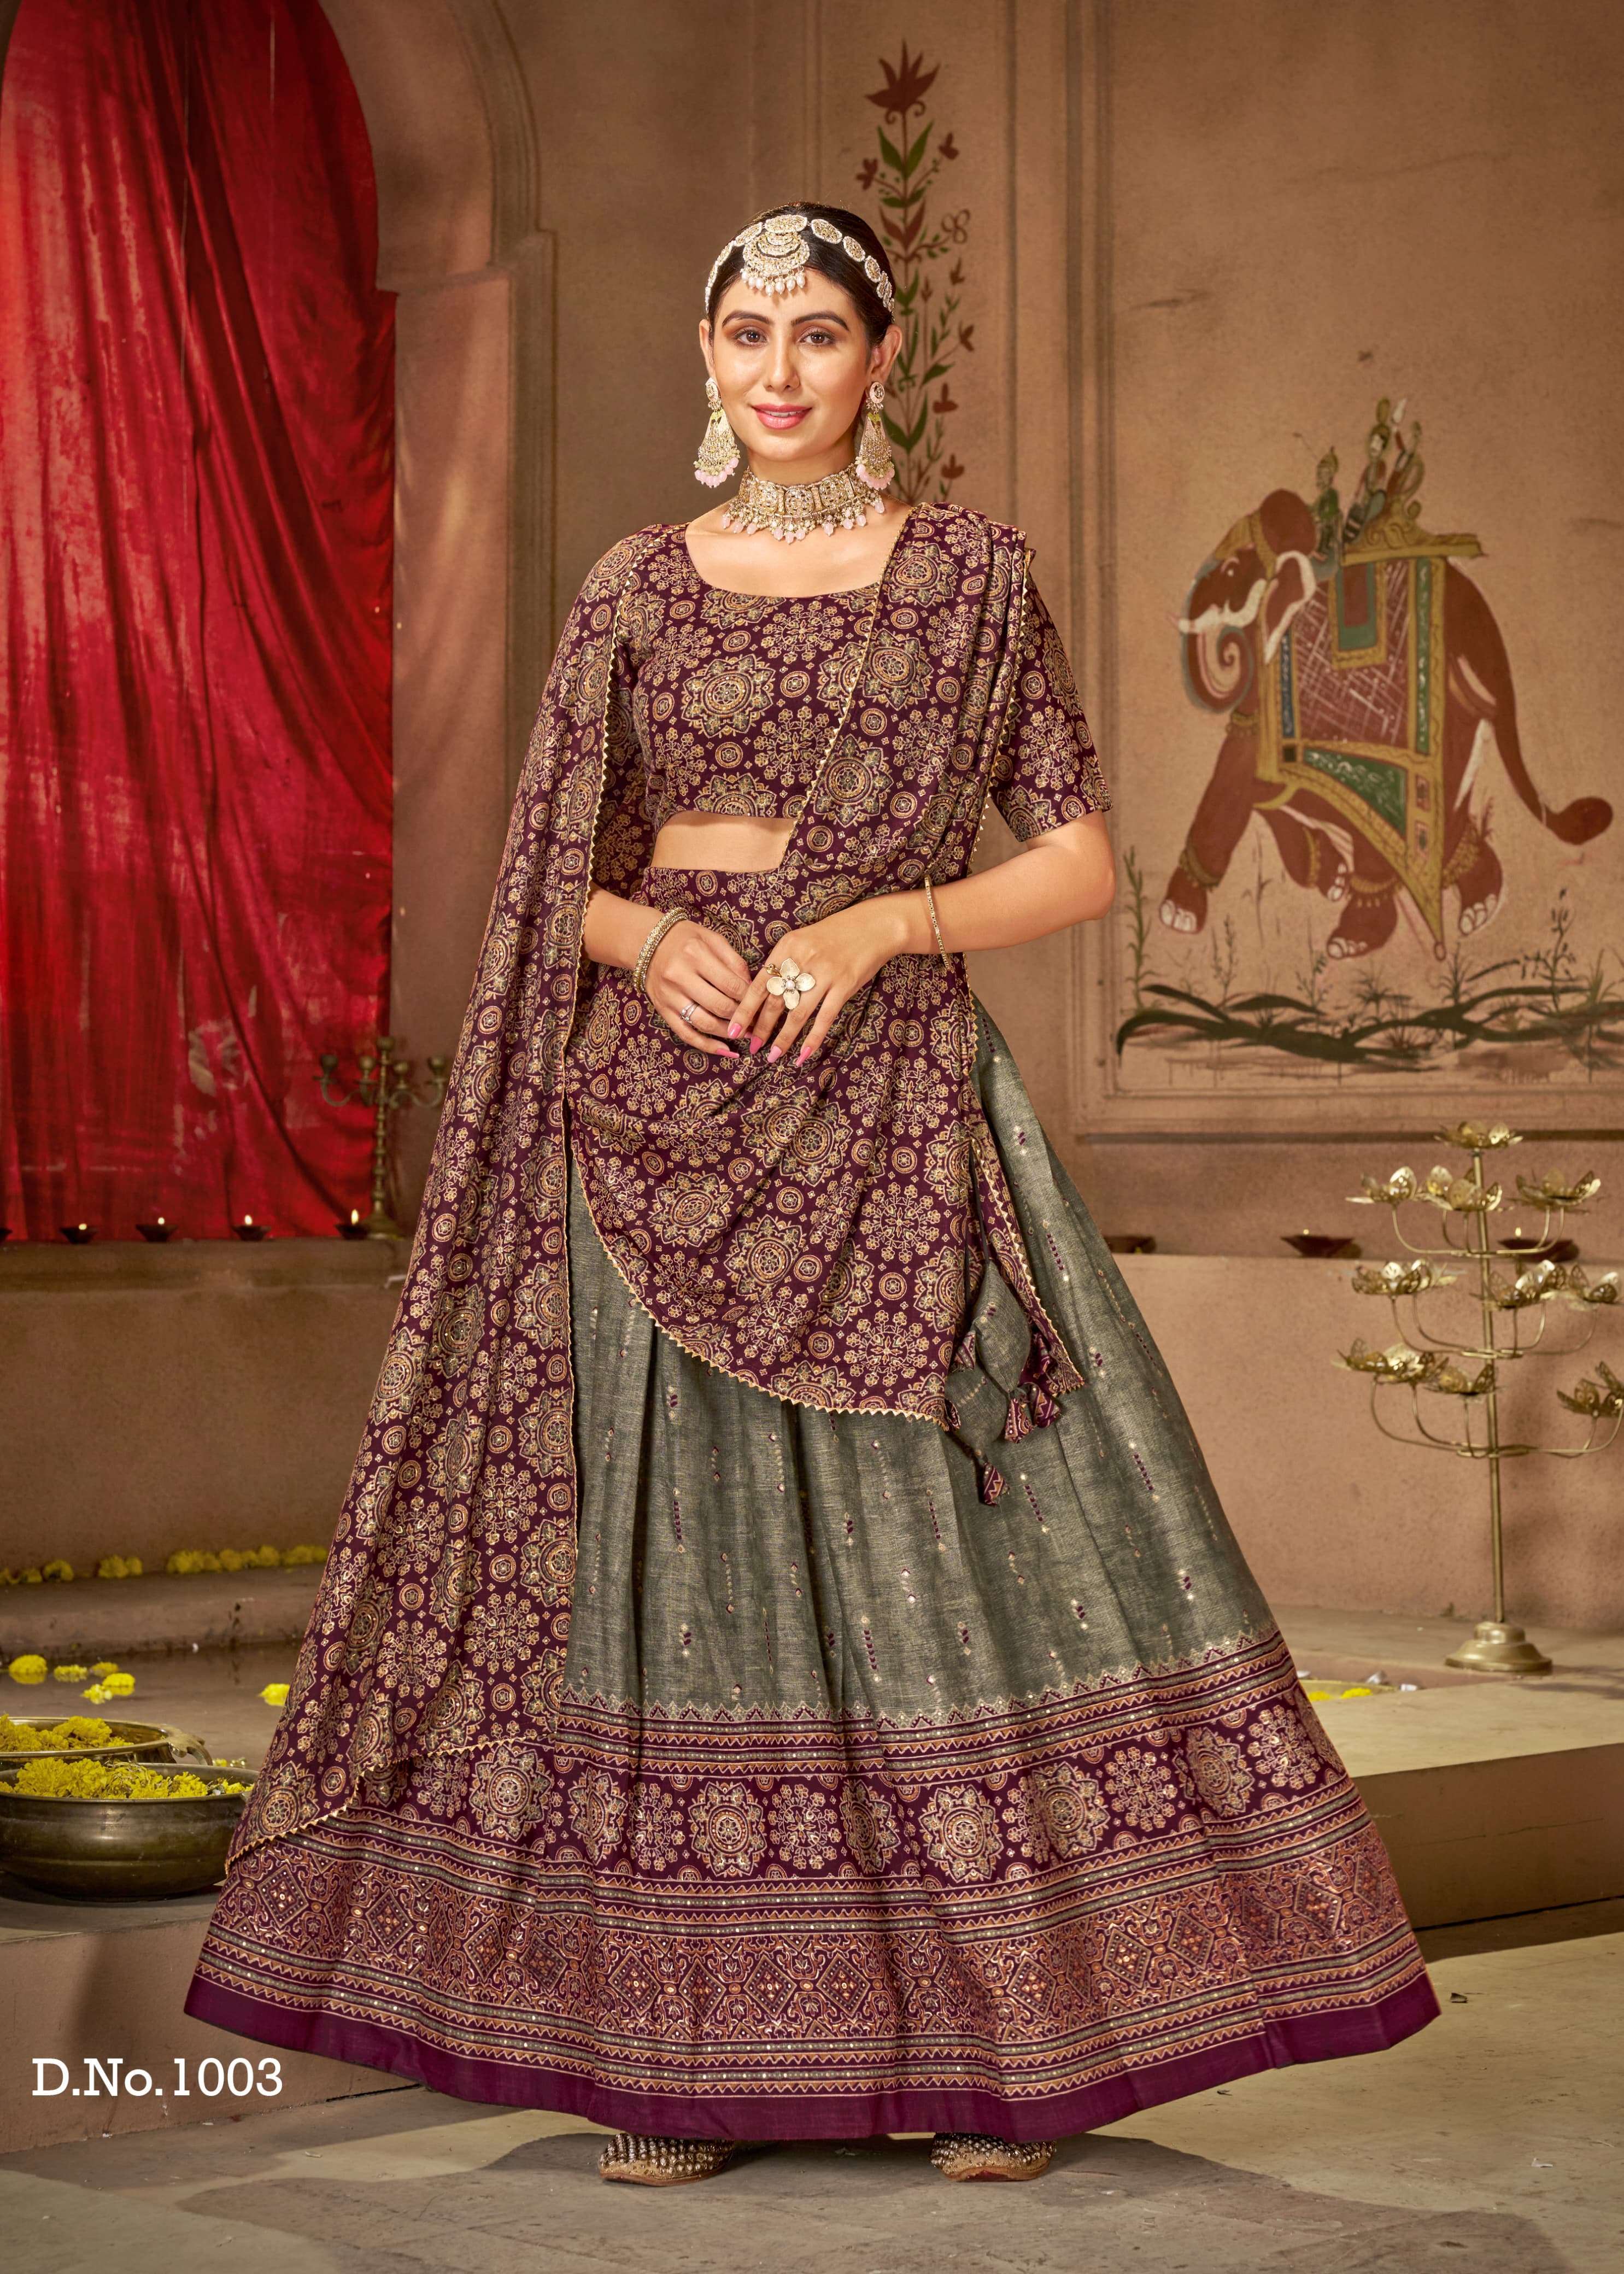 G3 Surat - Create a wedding look with a heavily printed... | Facebook